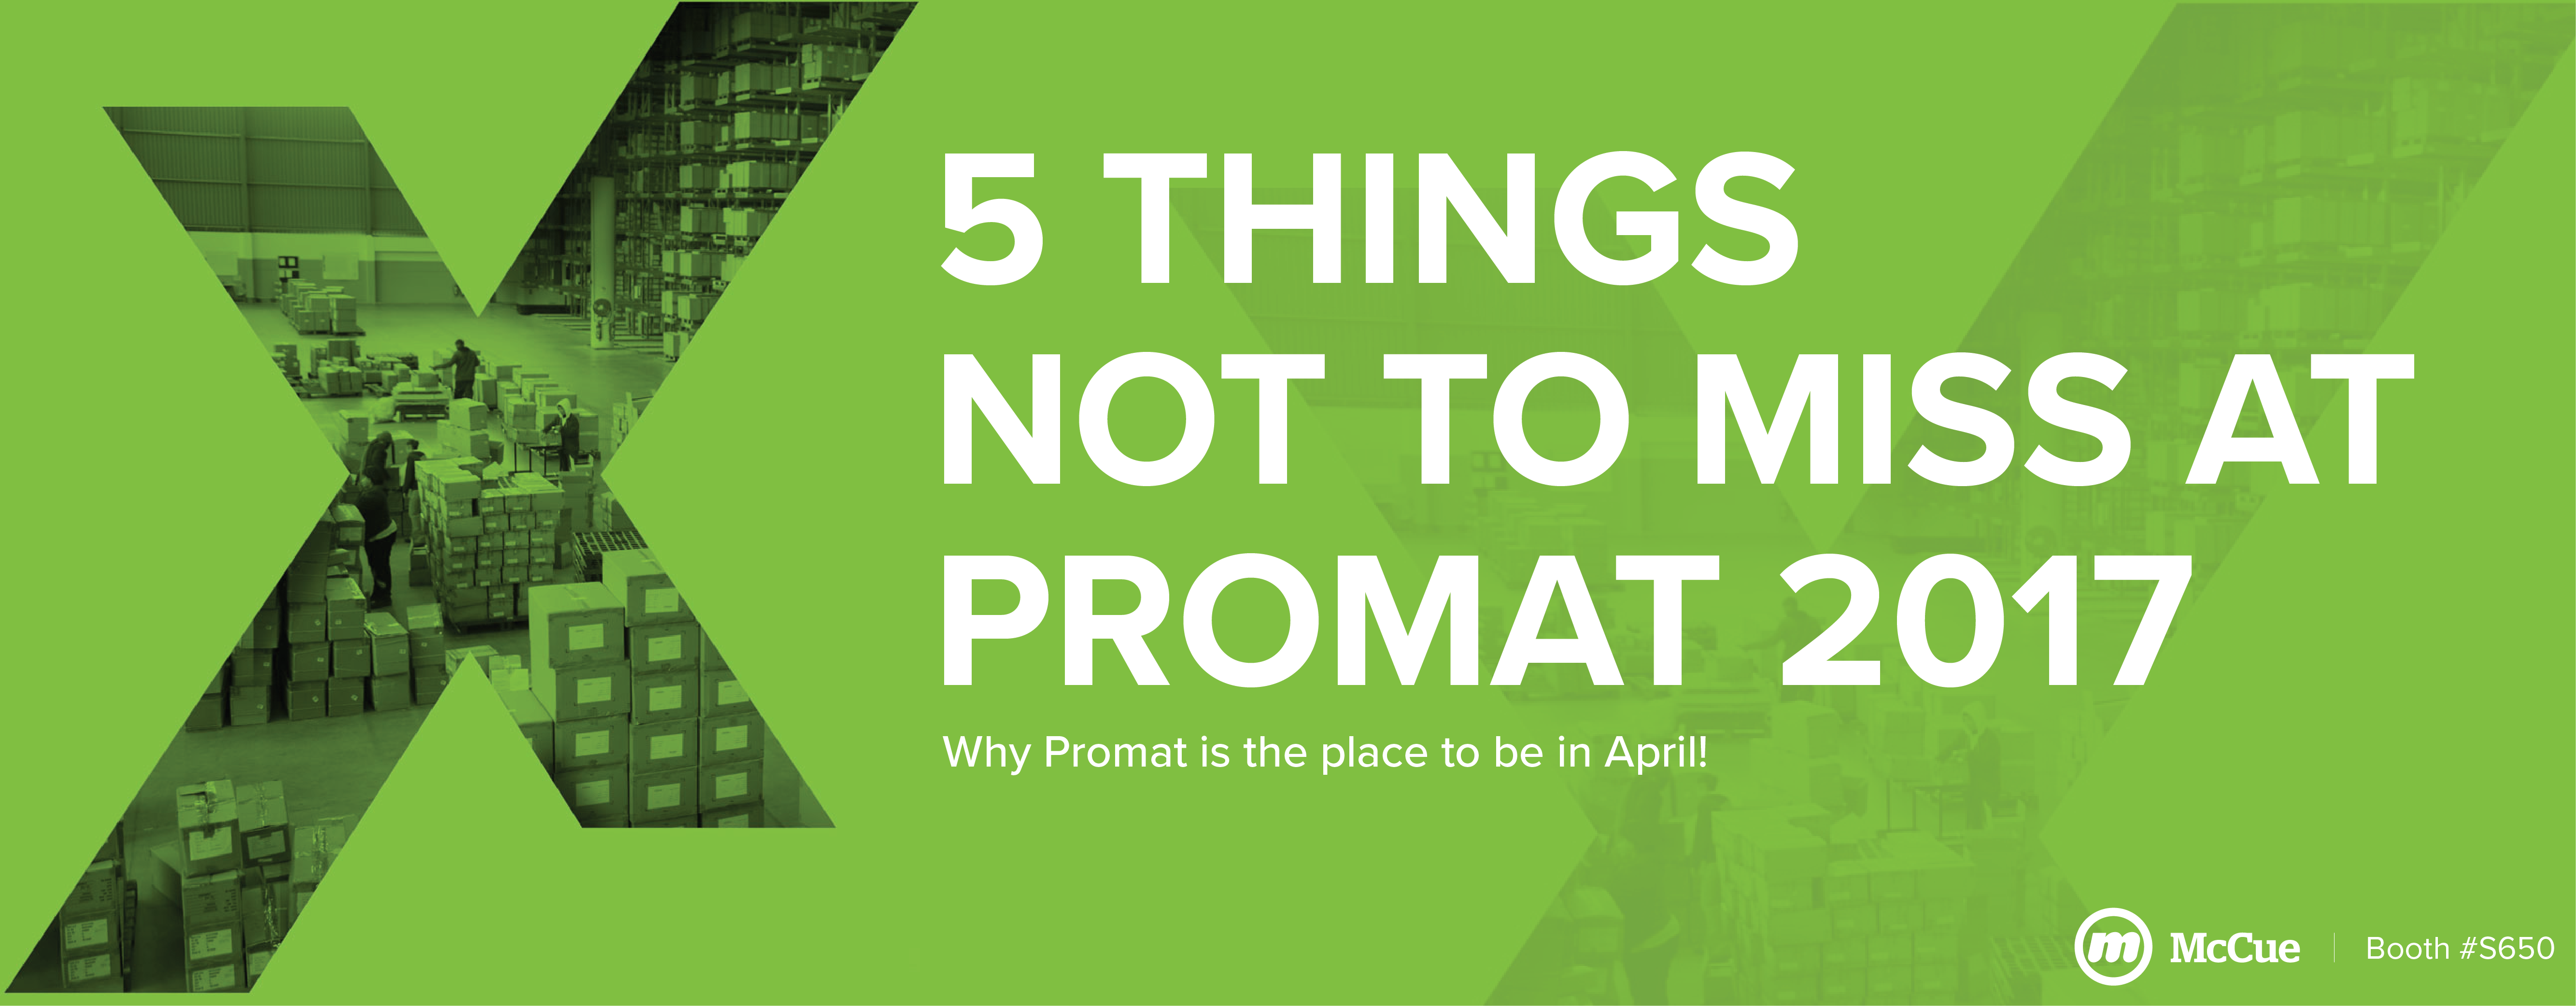 5 Things Not To Miss at PROMAT 2017